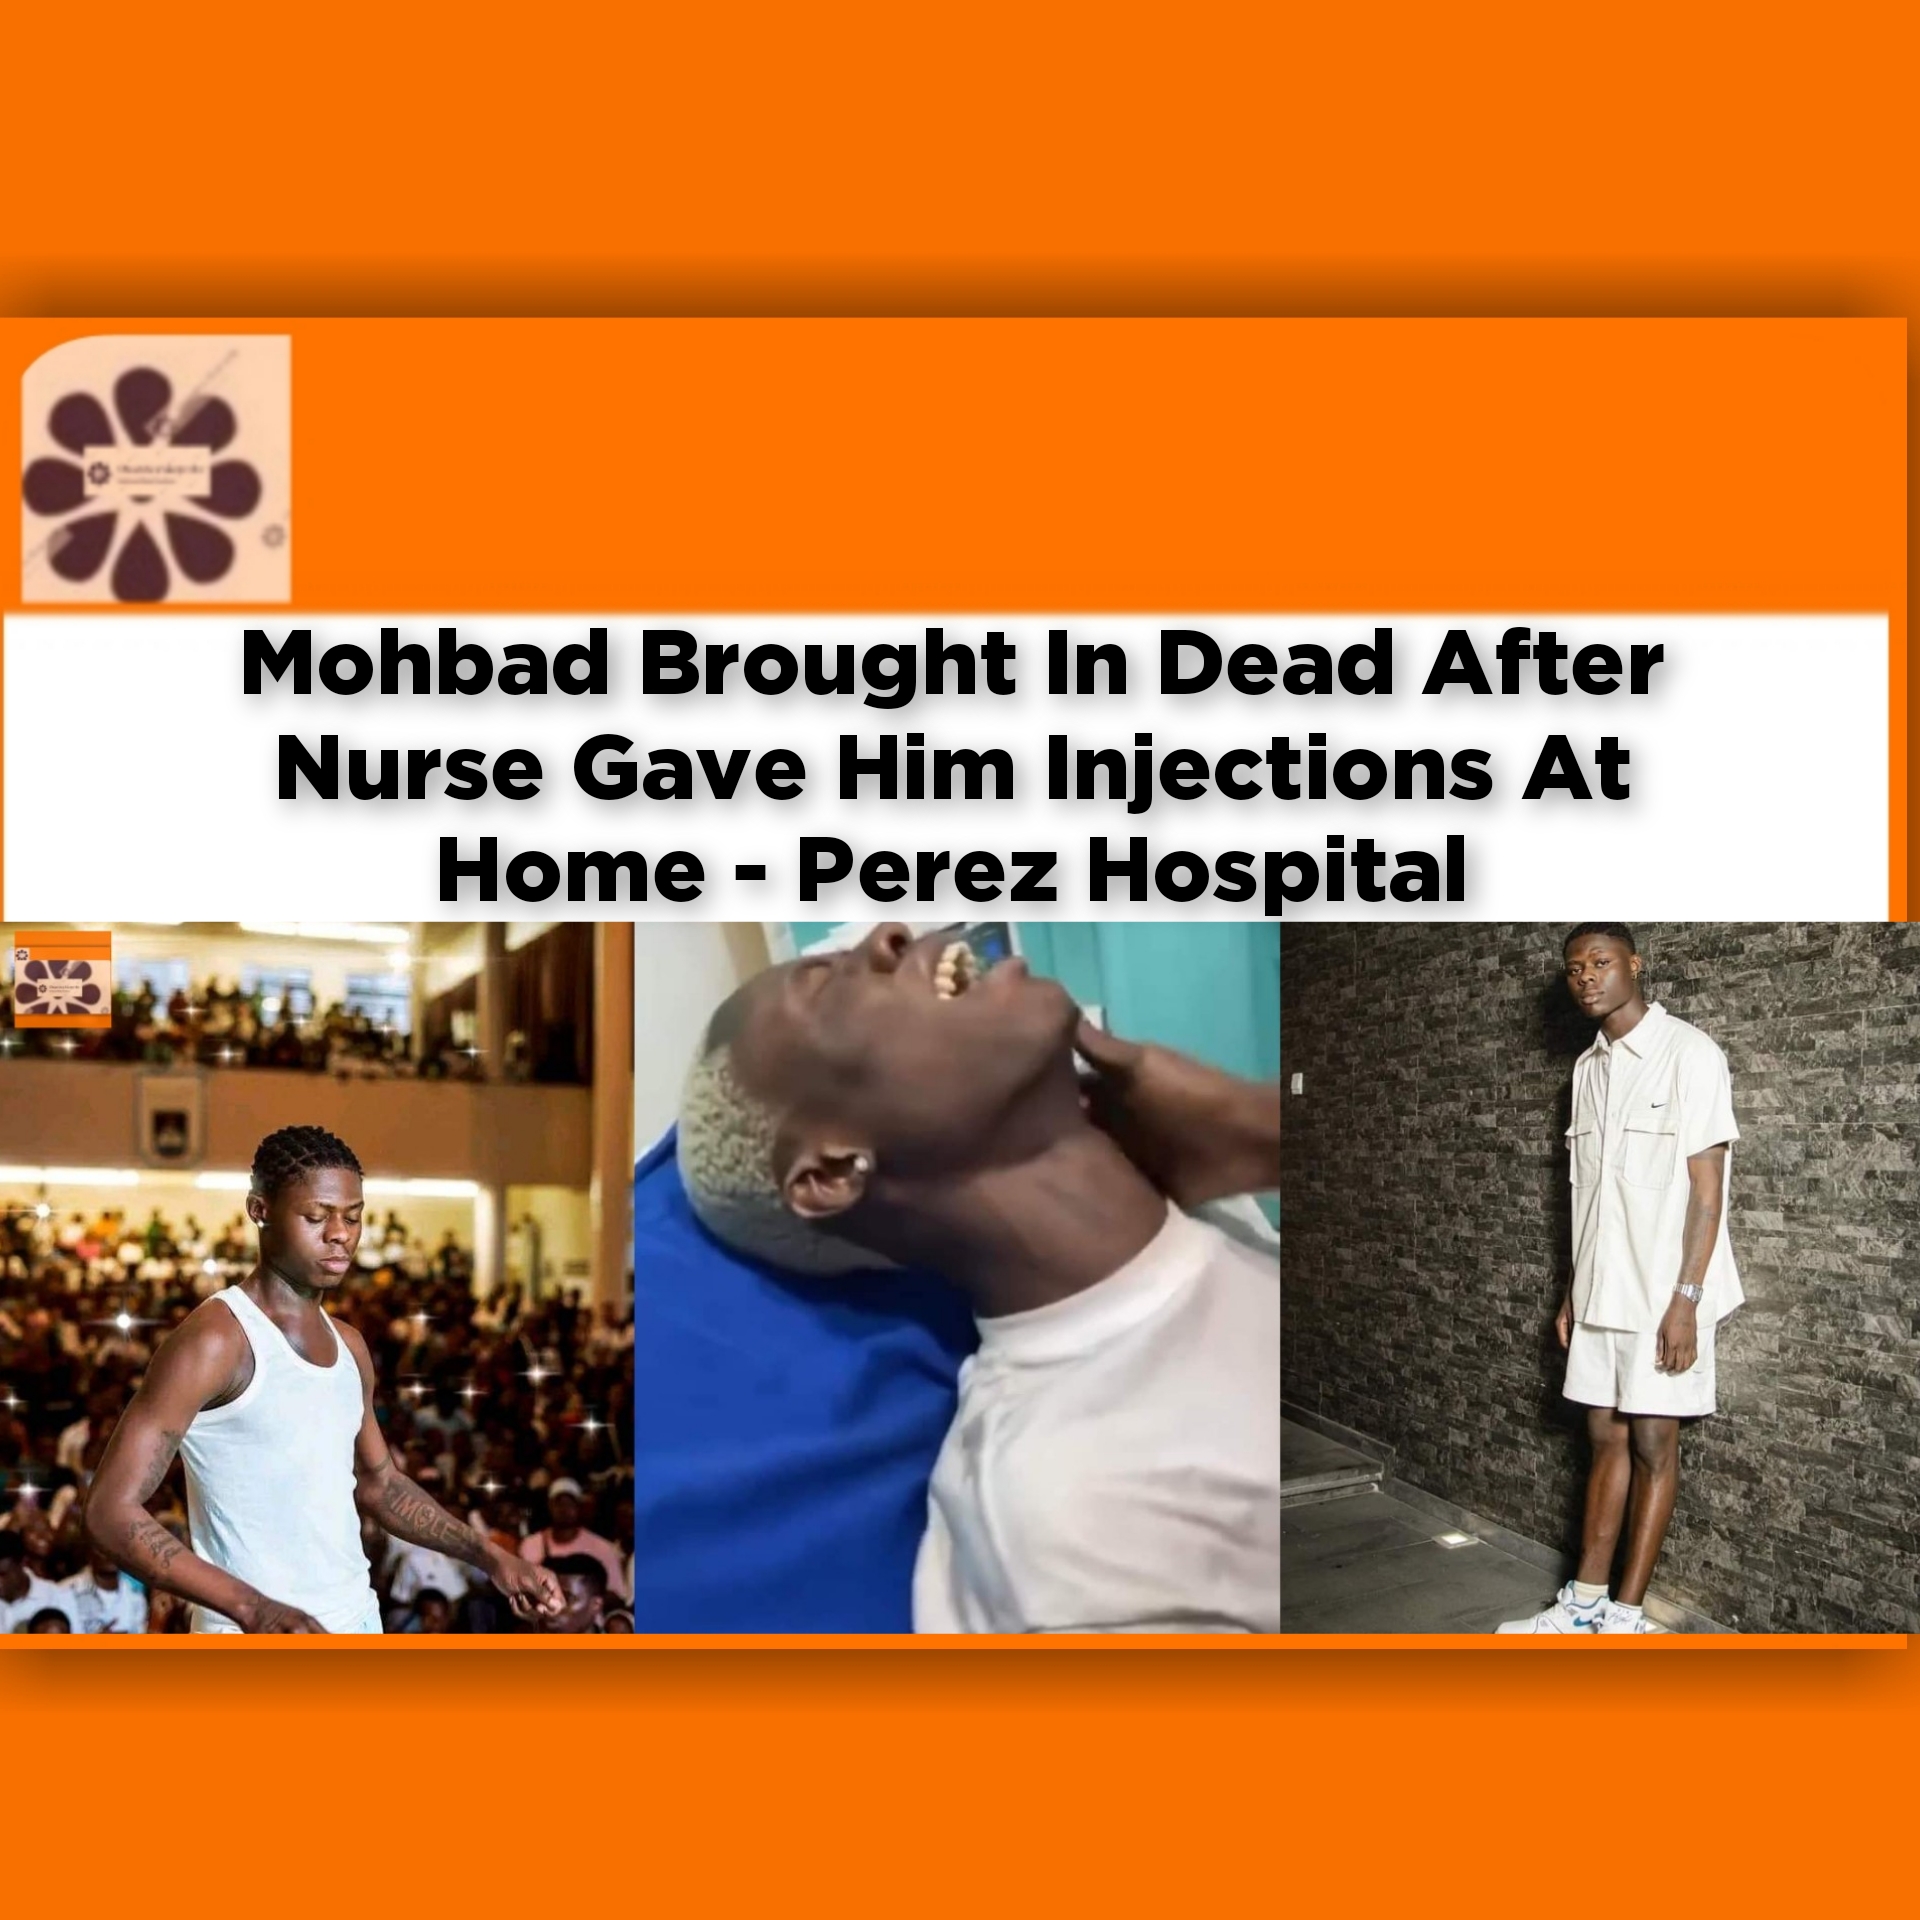 Mohbad Brought In Dead After Nurse Gave Him Injections At Home - Perez Hospital ~ OsazuwaAkonedo #Putin